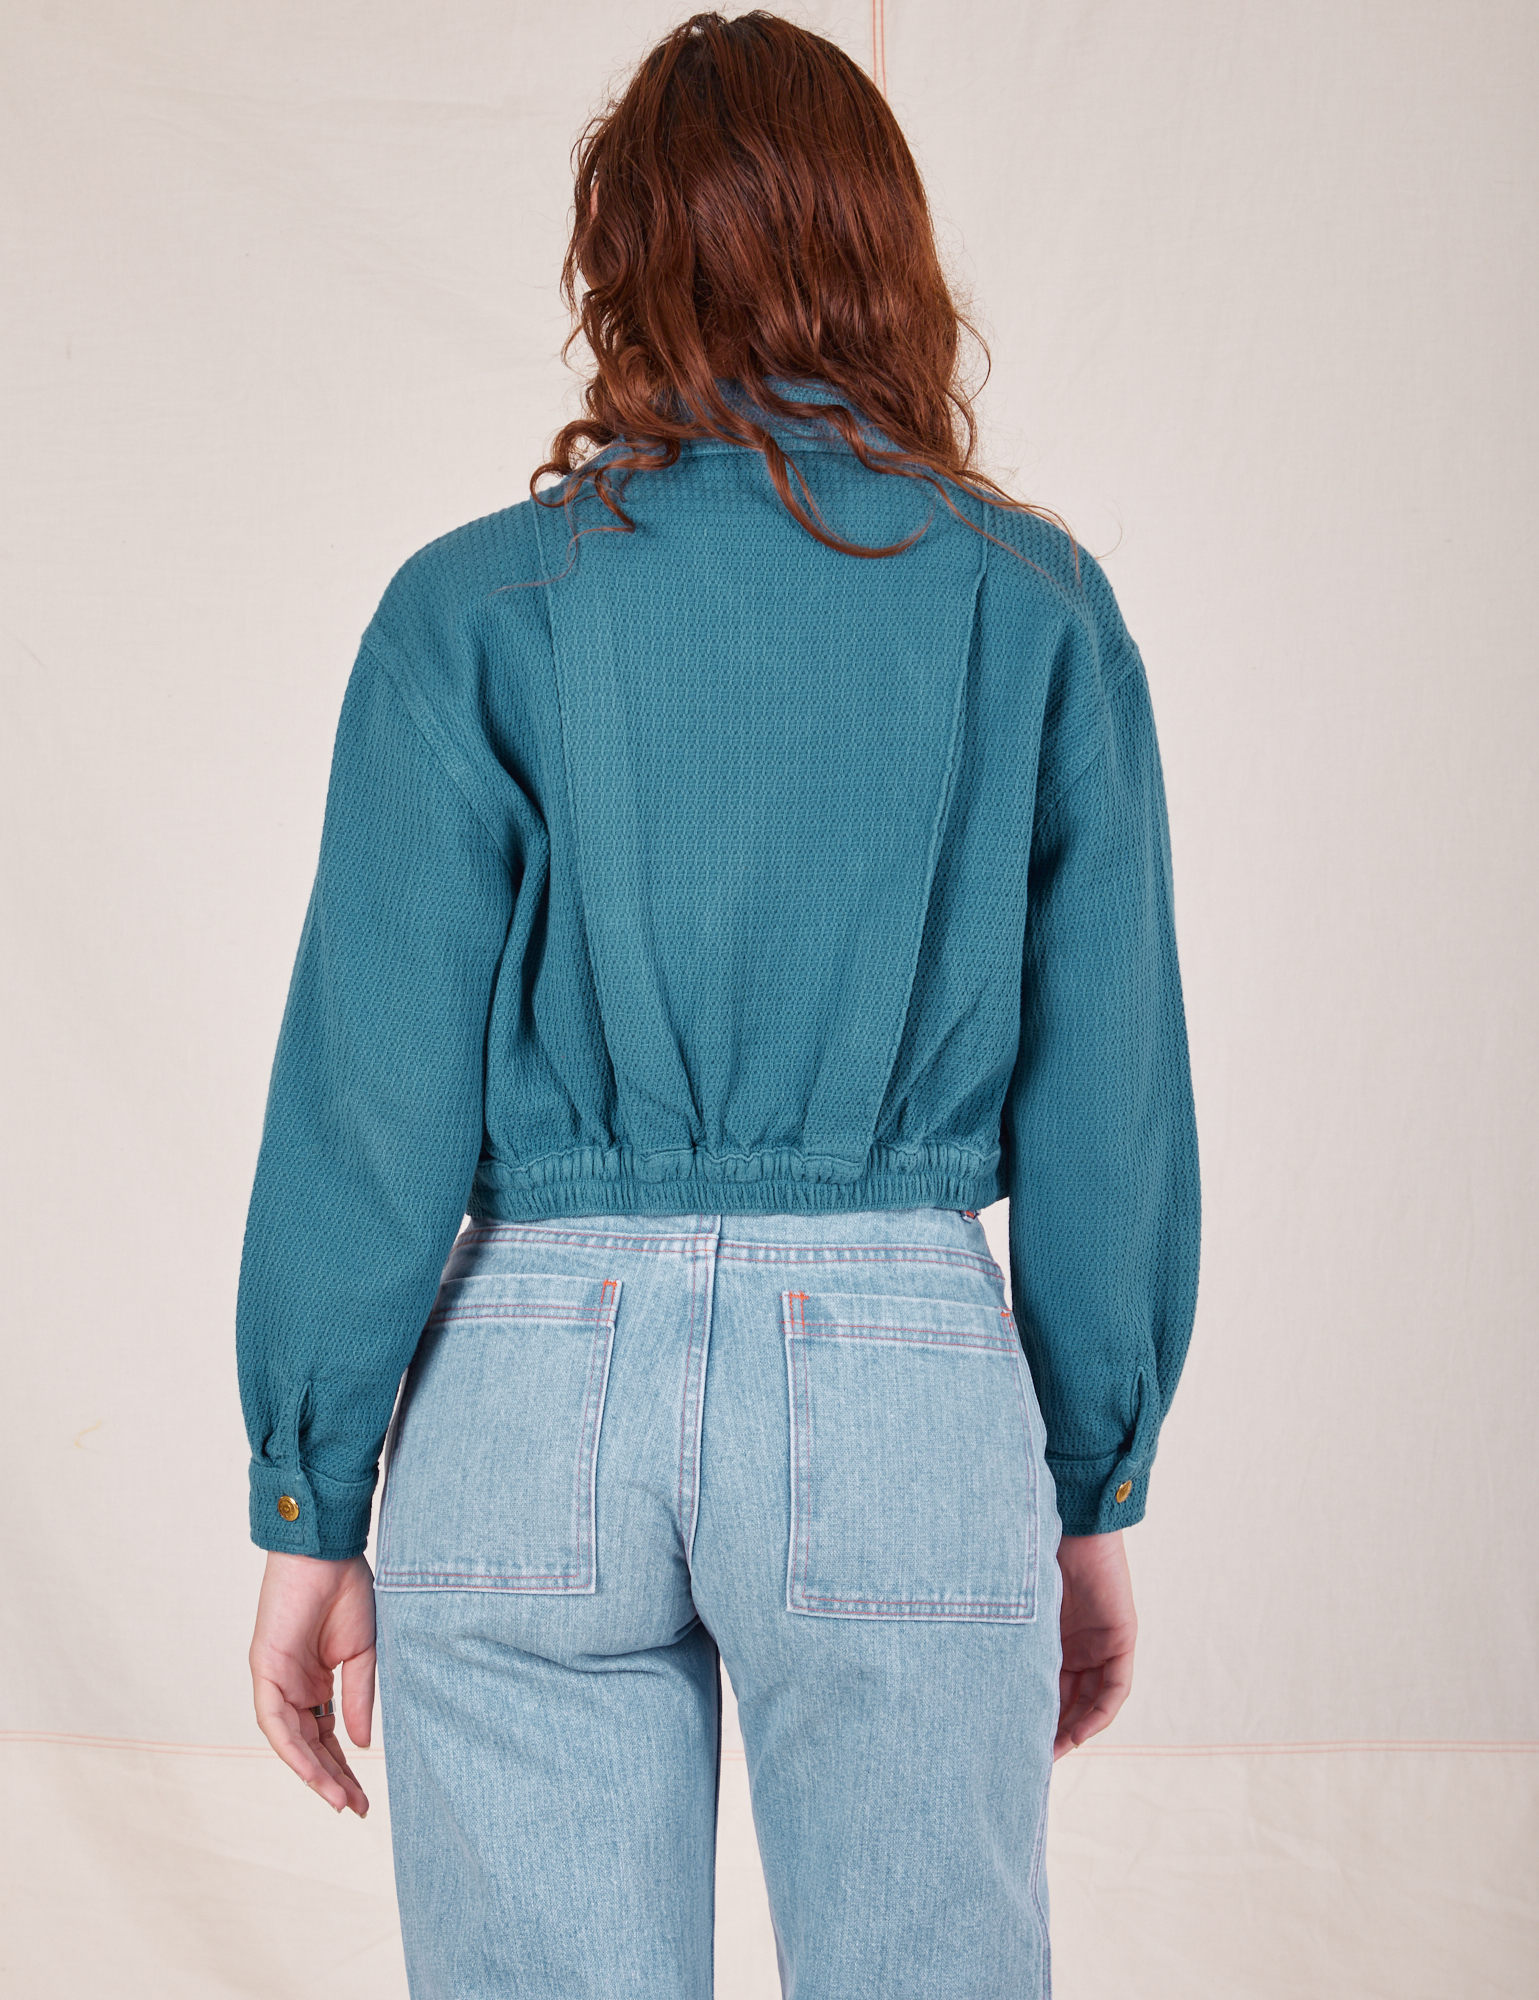 Back view of the Ricky Jacket in Marine Blue worn by Alex